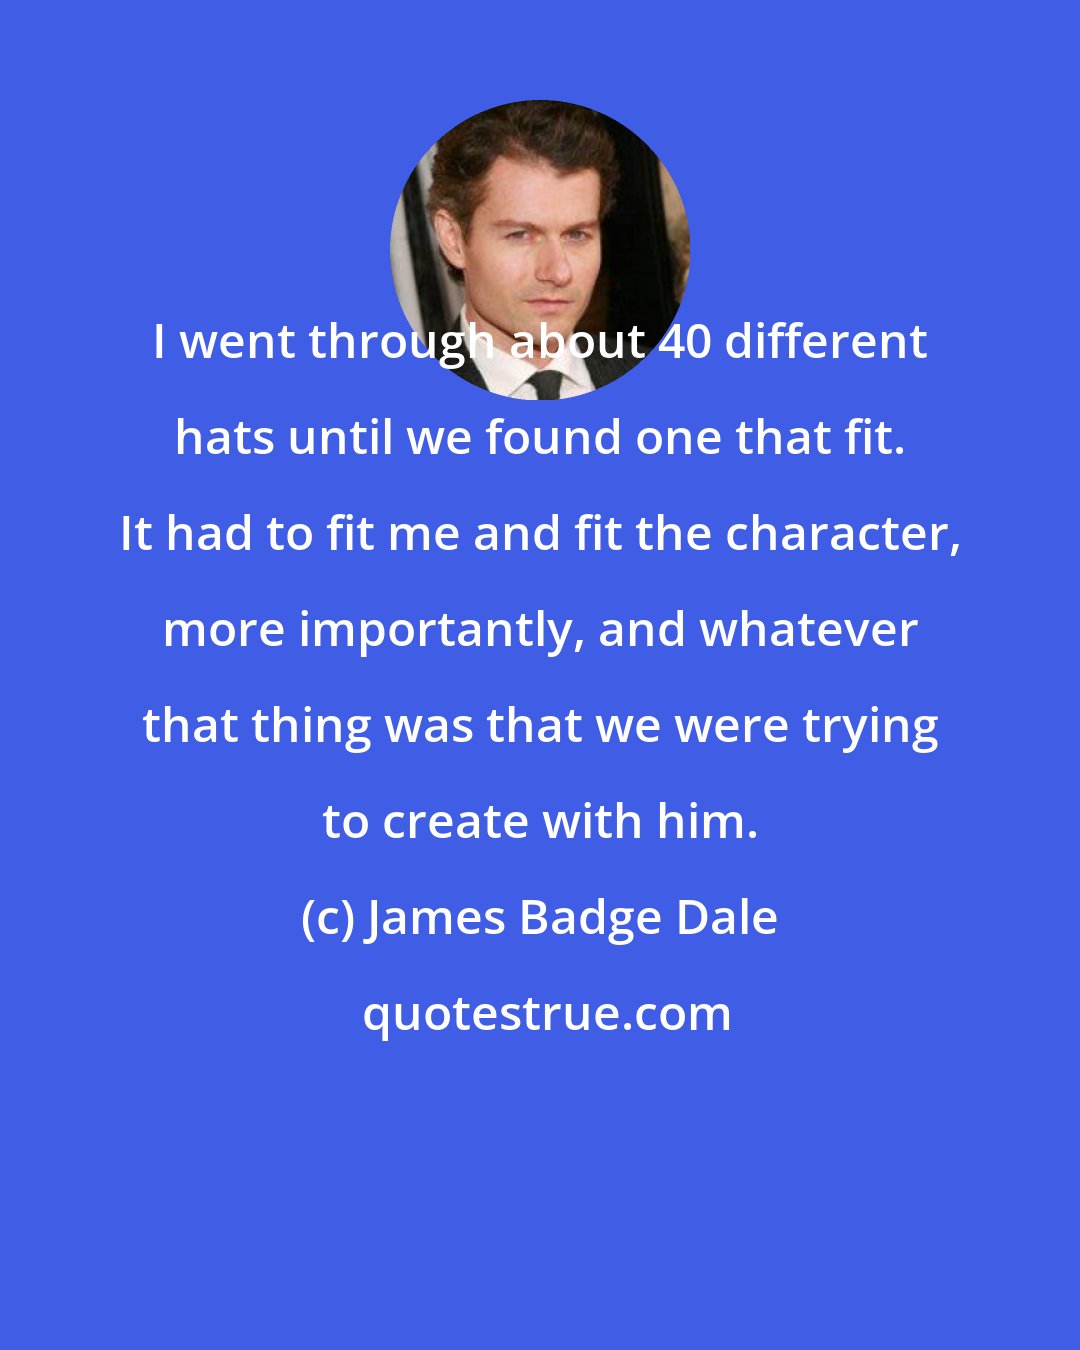 James Badge Dale: I went through about 40 different hats until we found one that fit. It had to fit me and fit the character, more importantly, and whatever that thing was that we were trying to create with him.